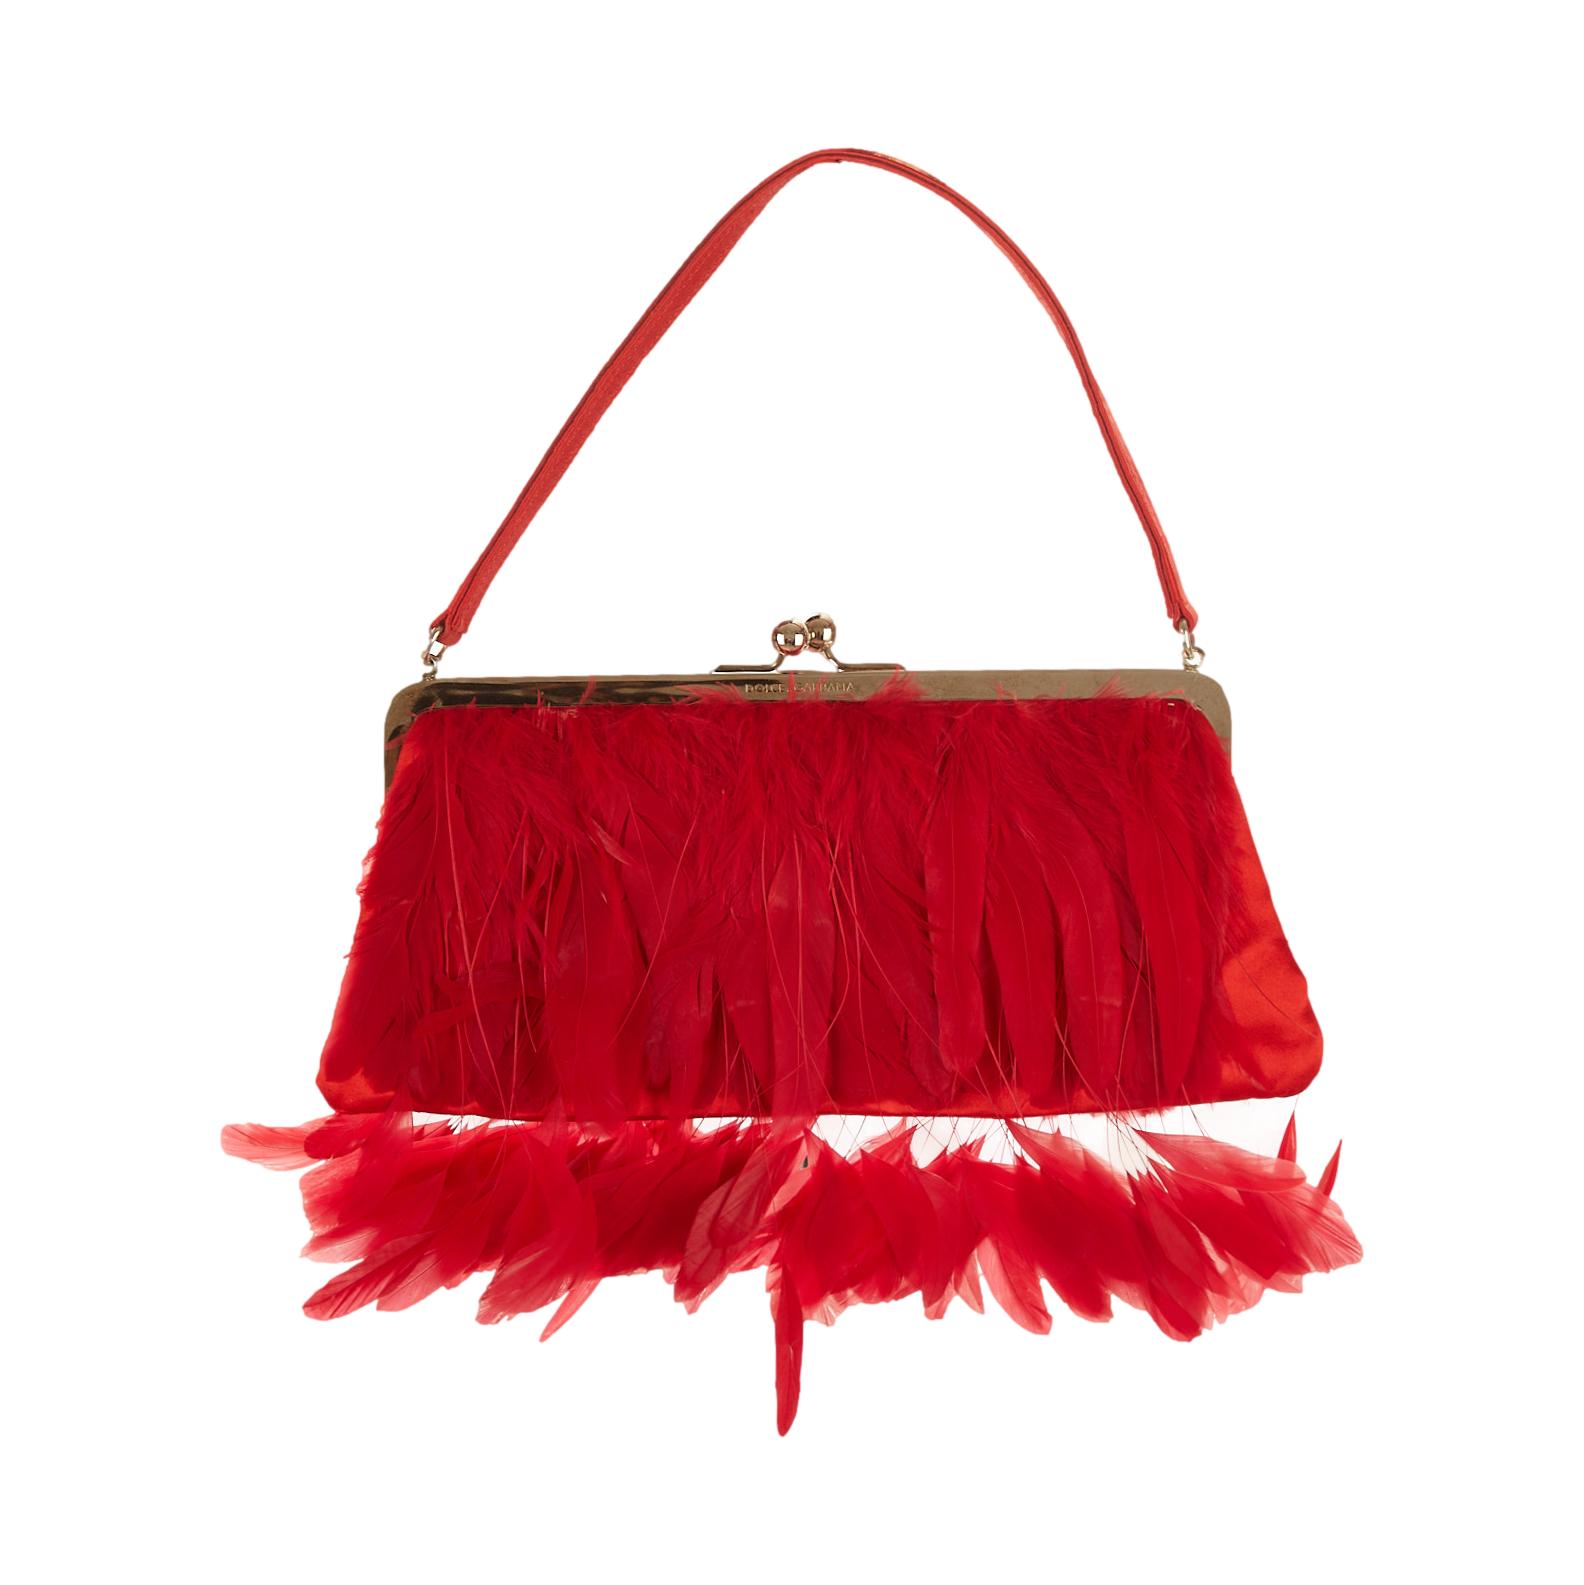 Dolce & Gabbana Red Feather Bag